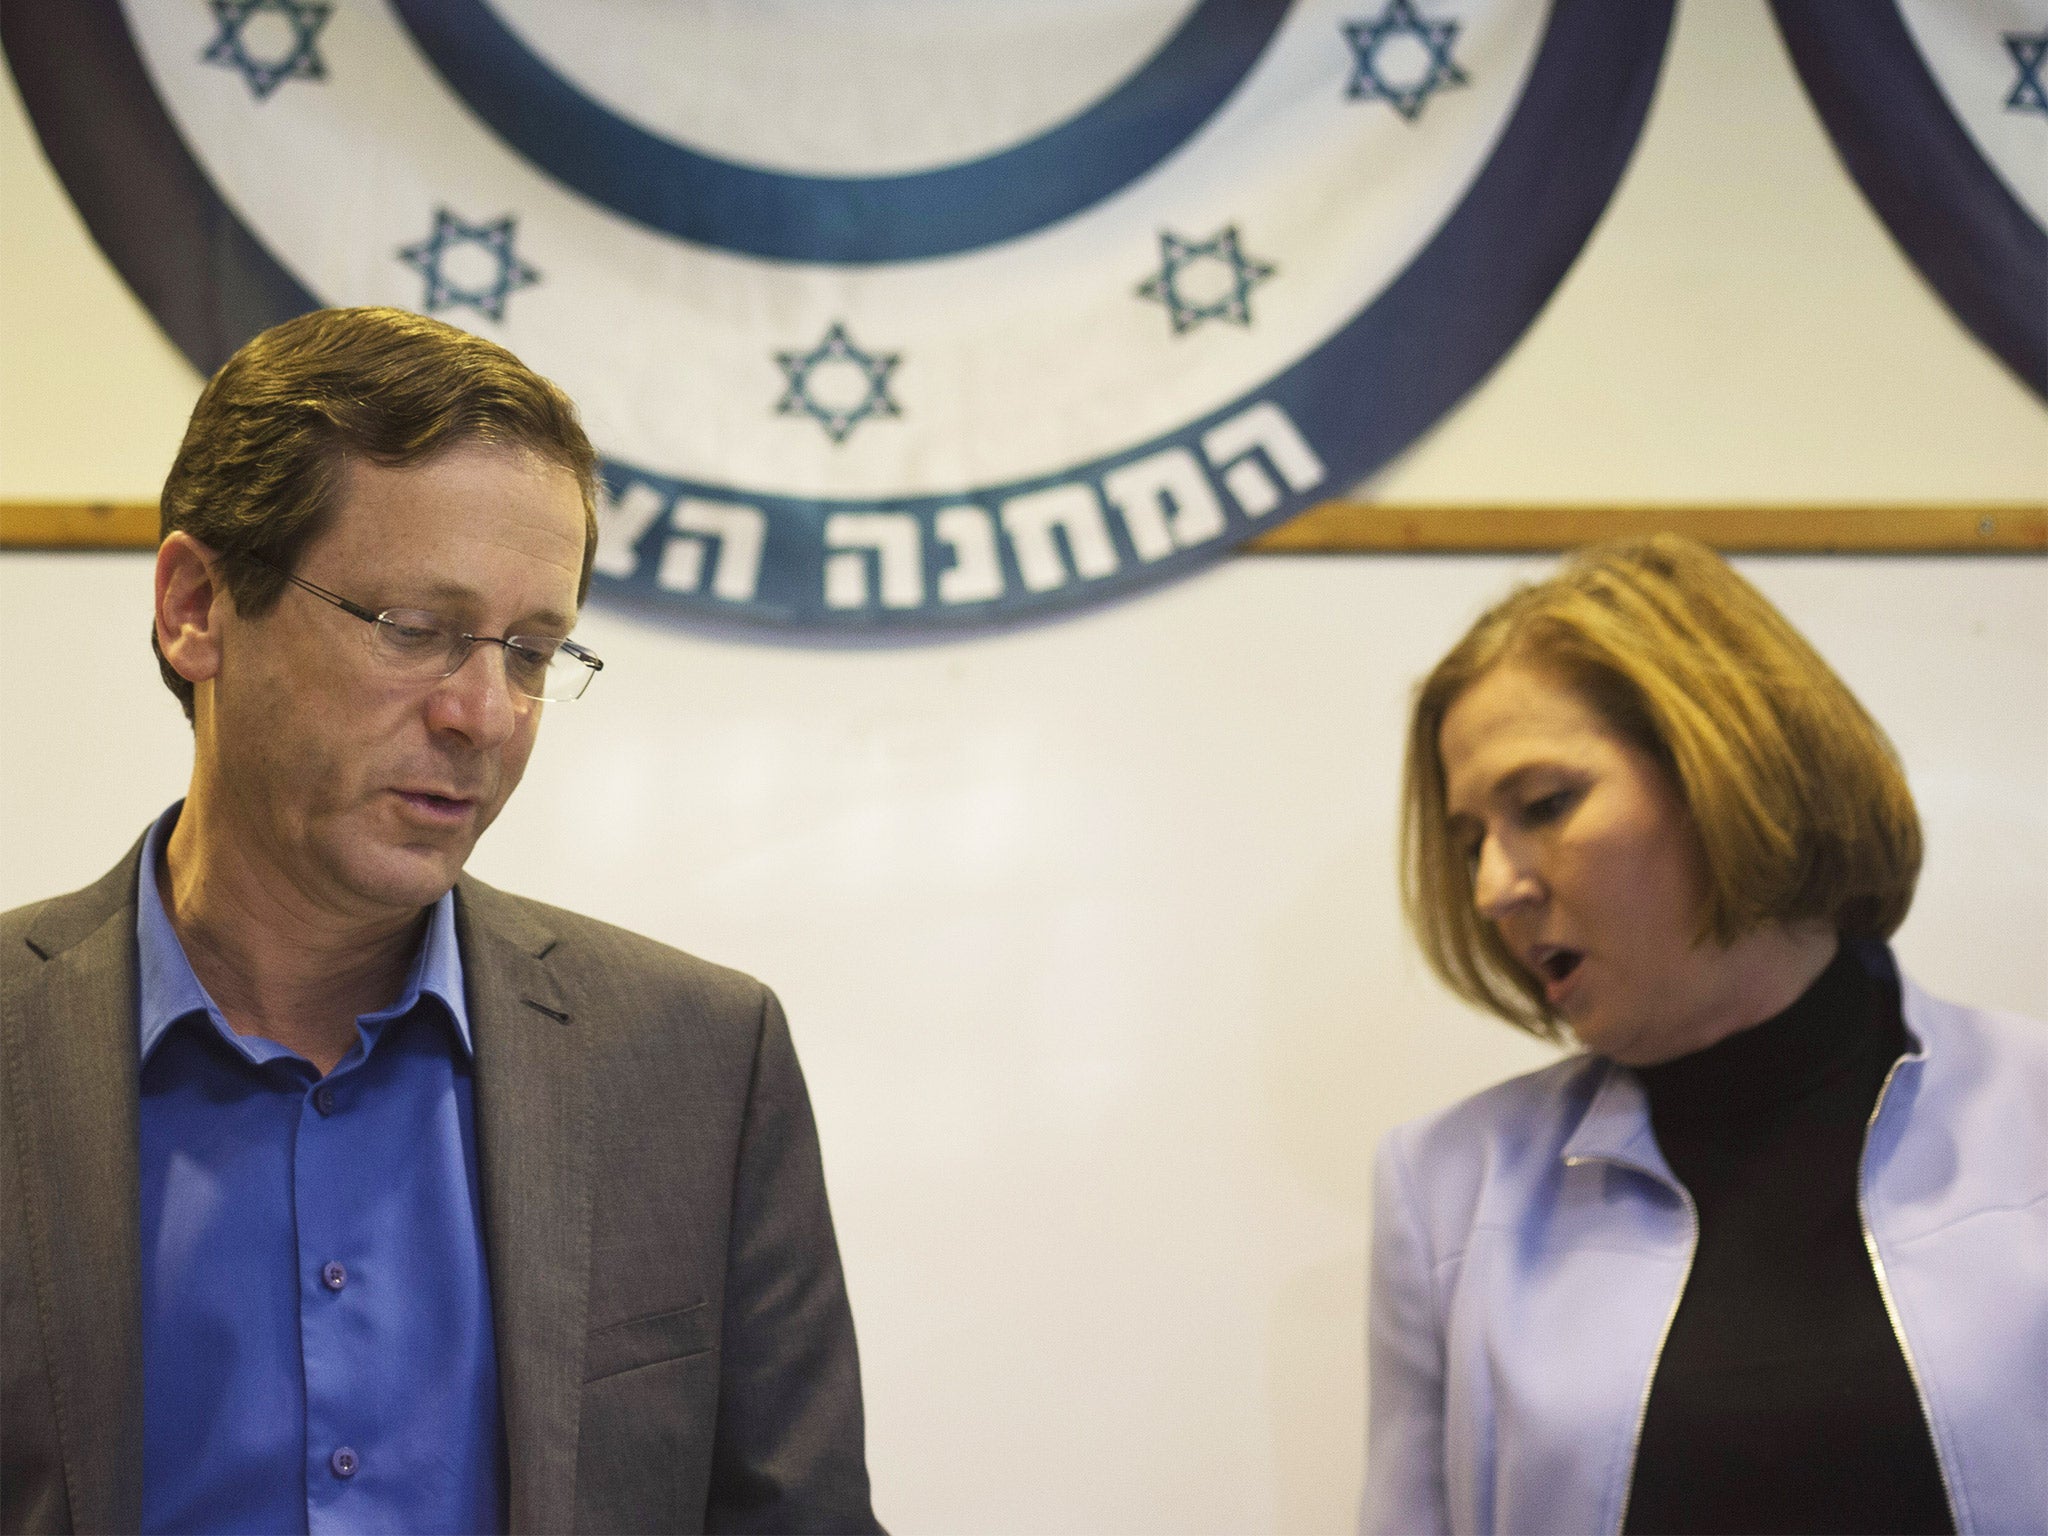 The Zionist Union party co-leaders Isaac Herzog and Tzipi Livni vowed to continue to oppose the government